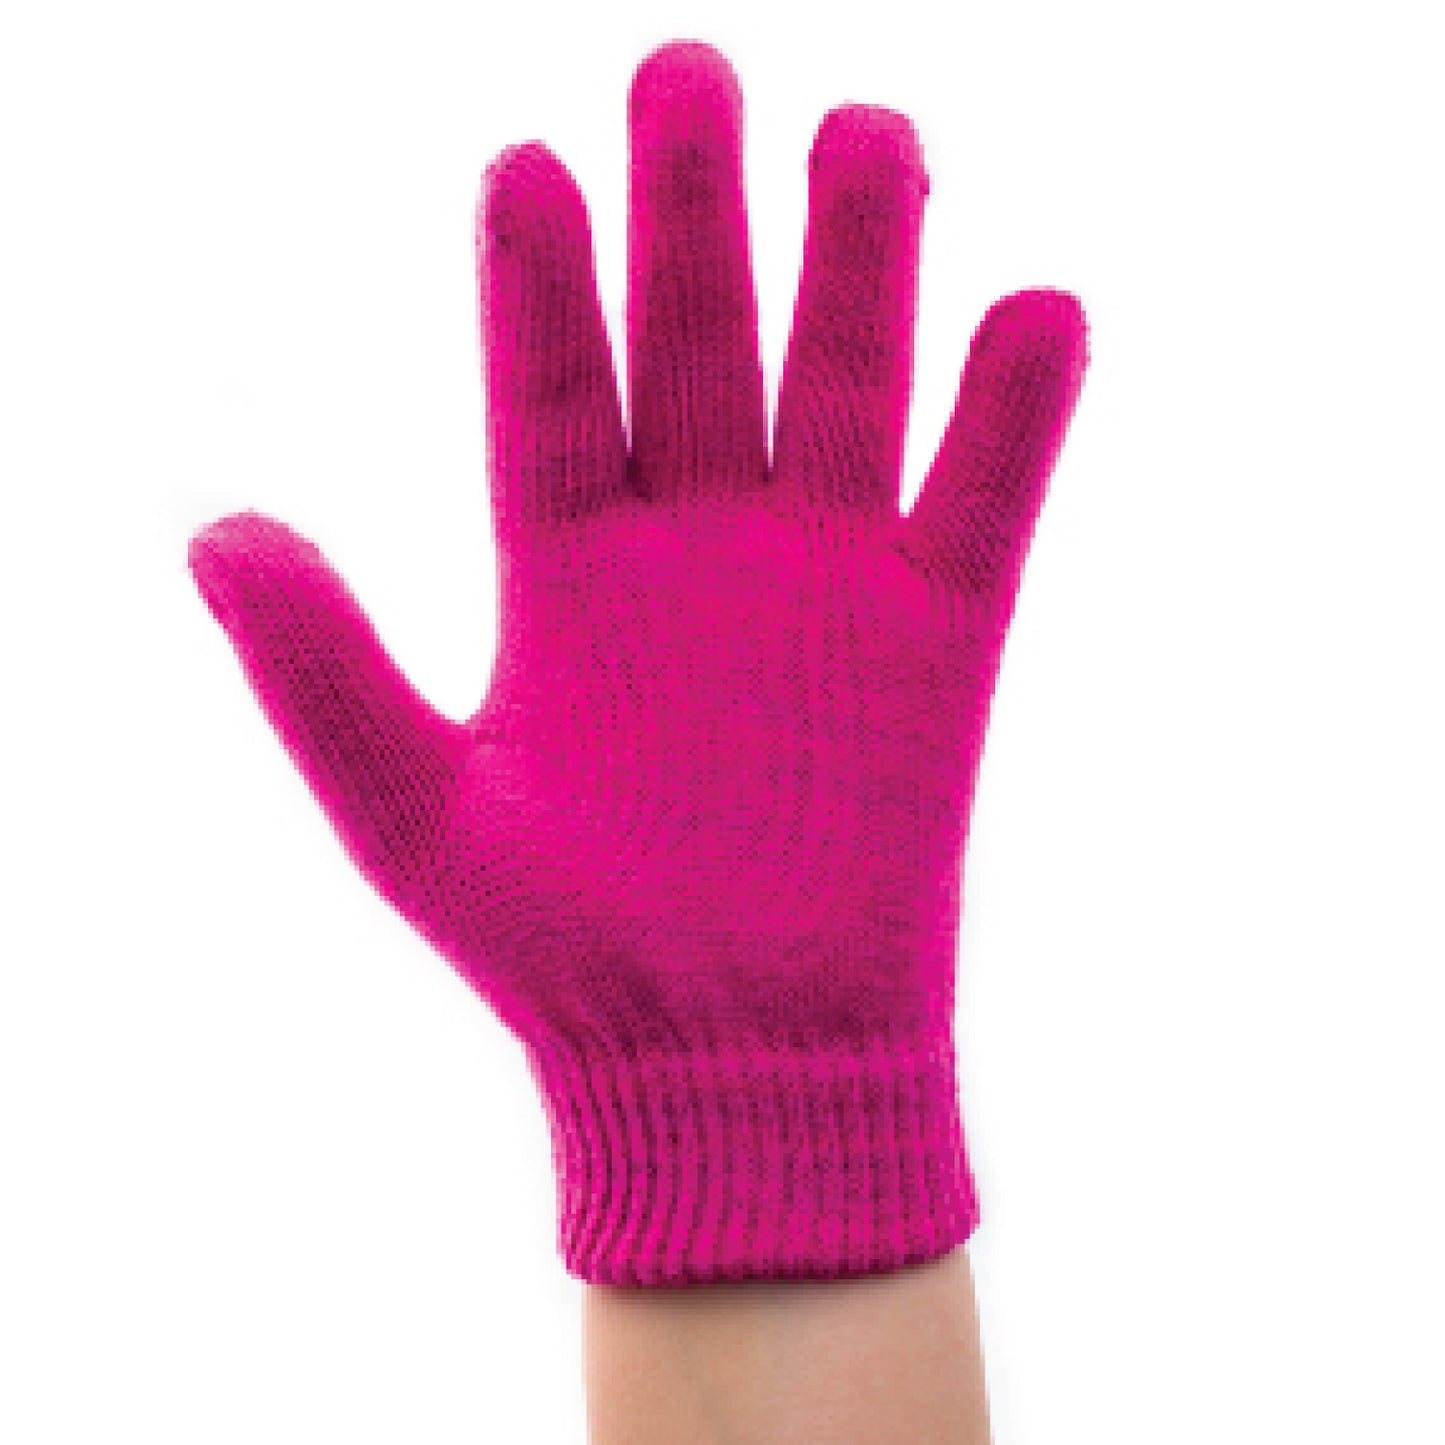 Winter Kids Youth Gaming Touchscreen Glove